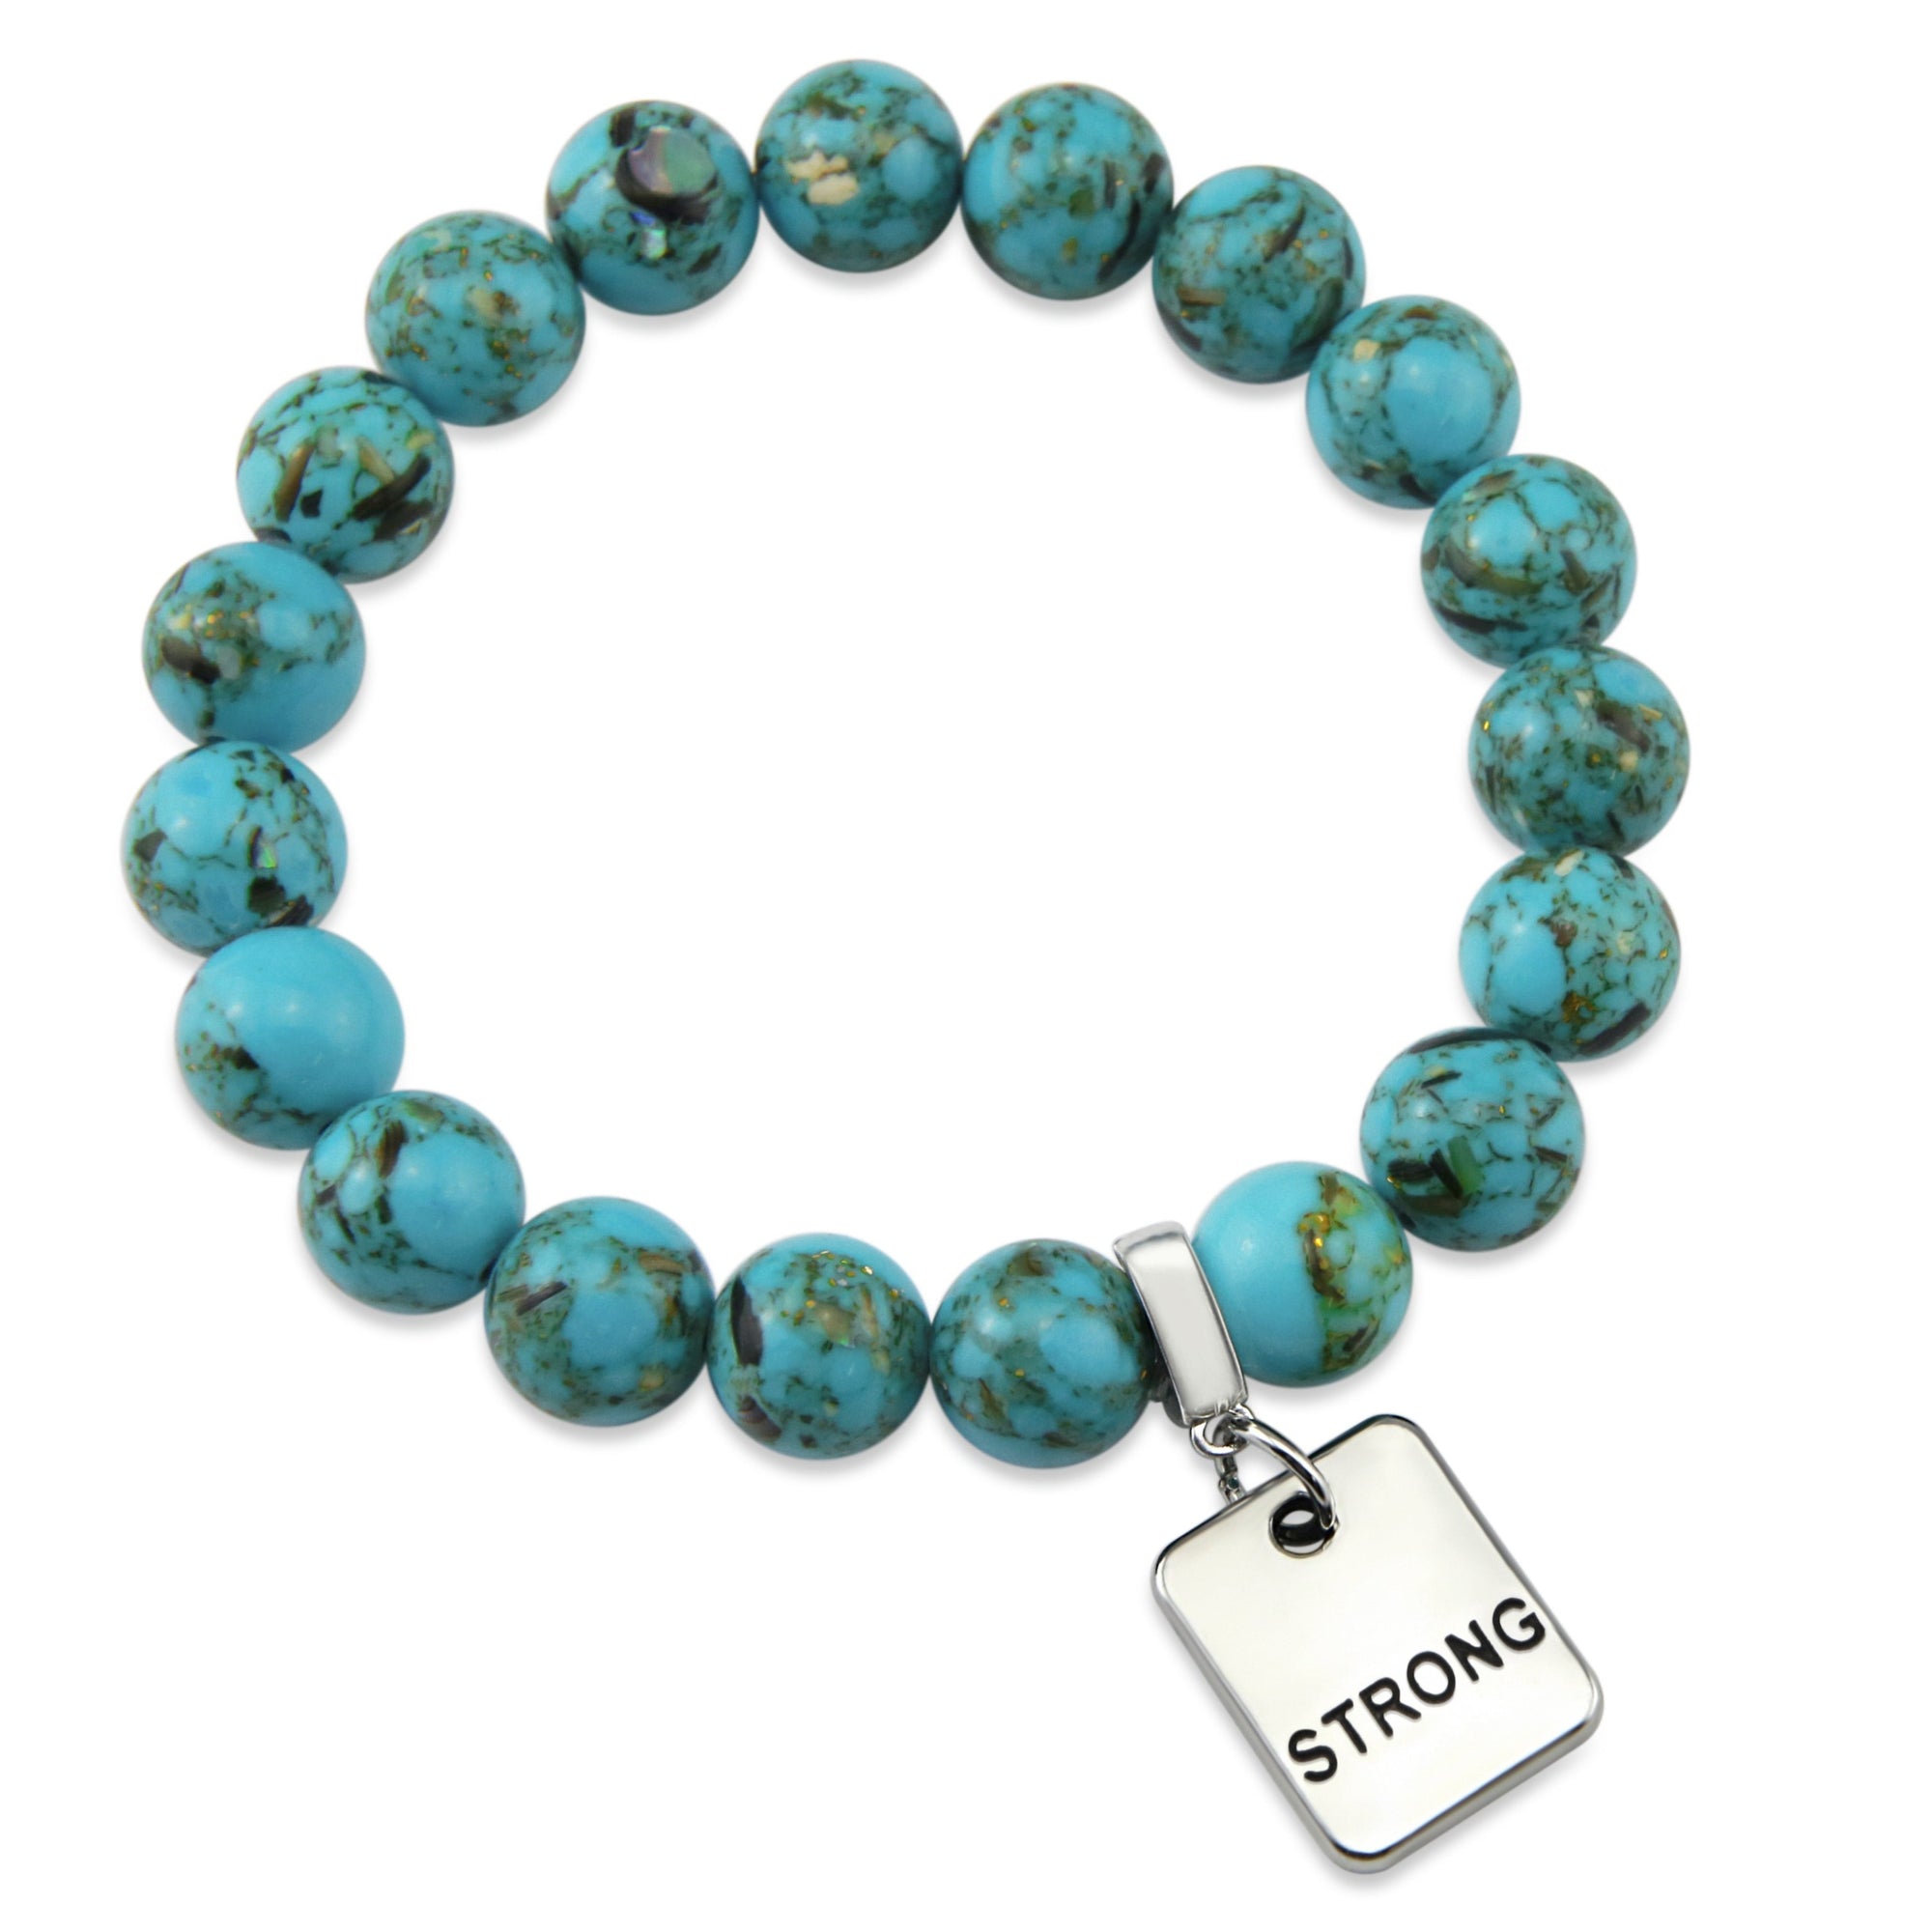 Teal coloured stone bracelet with word charm and silve r clip. 